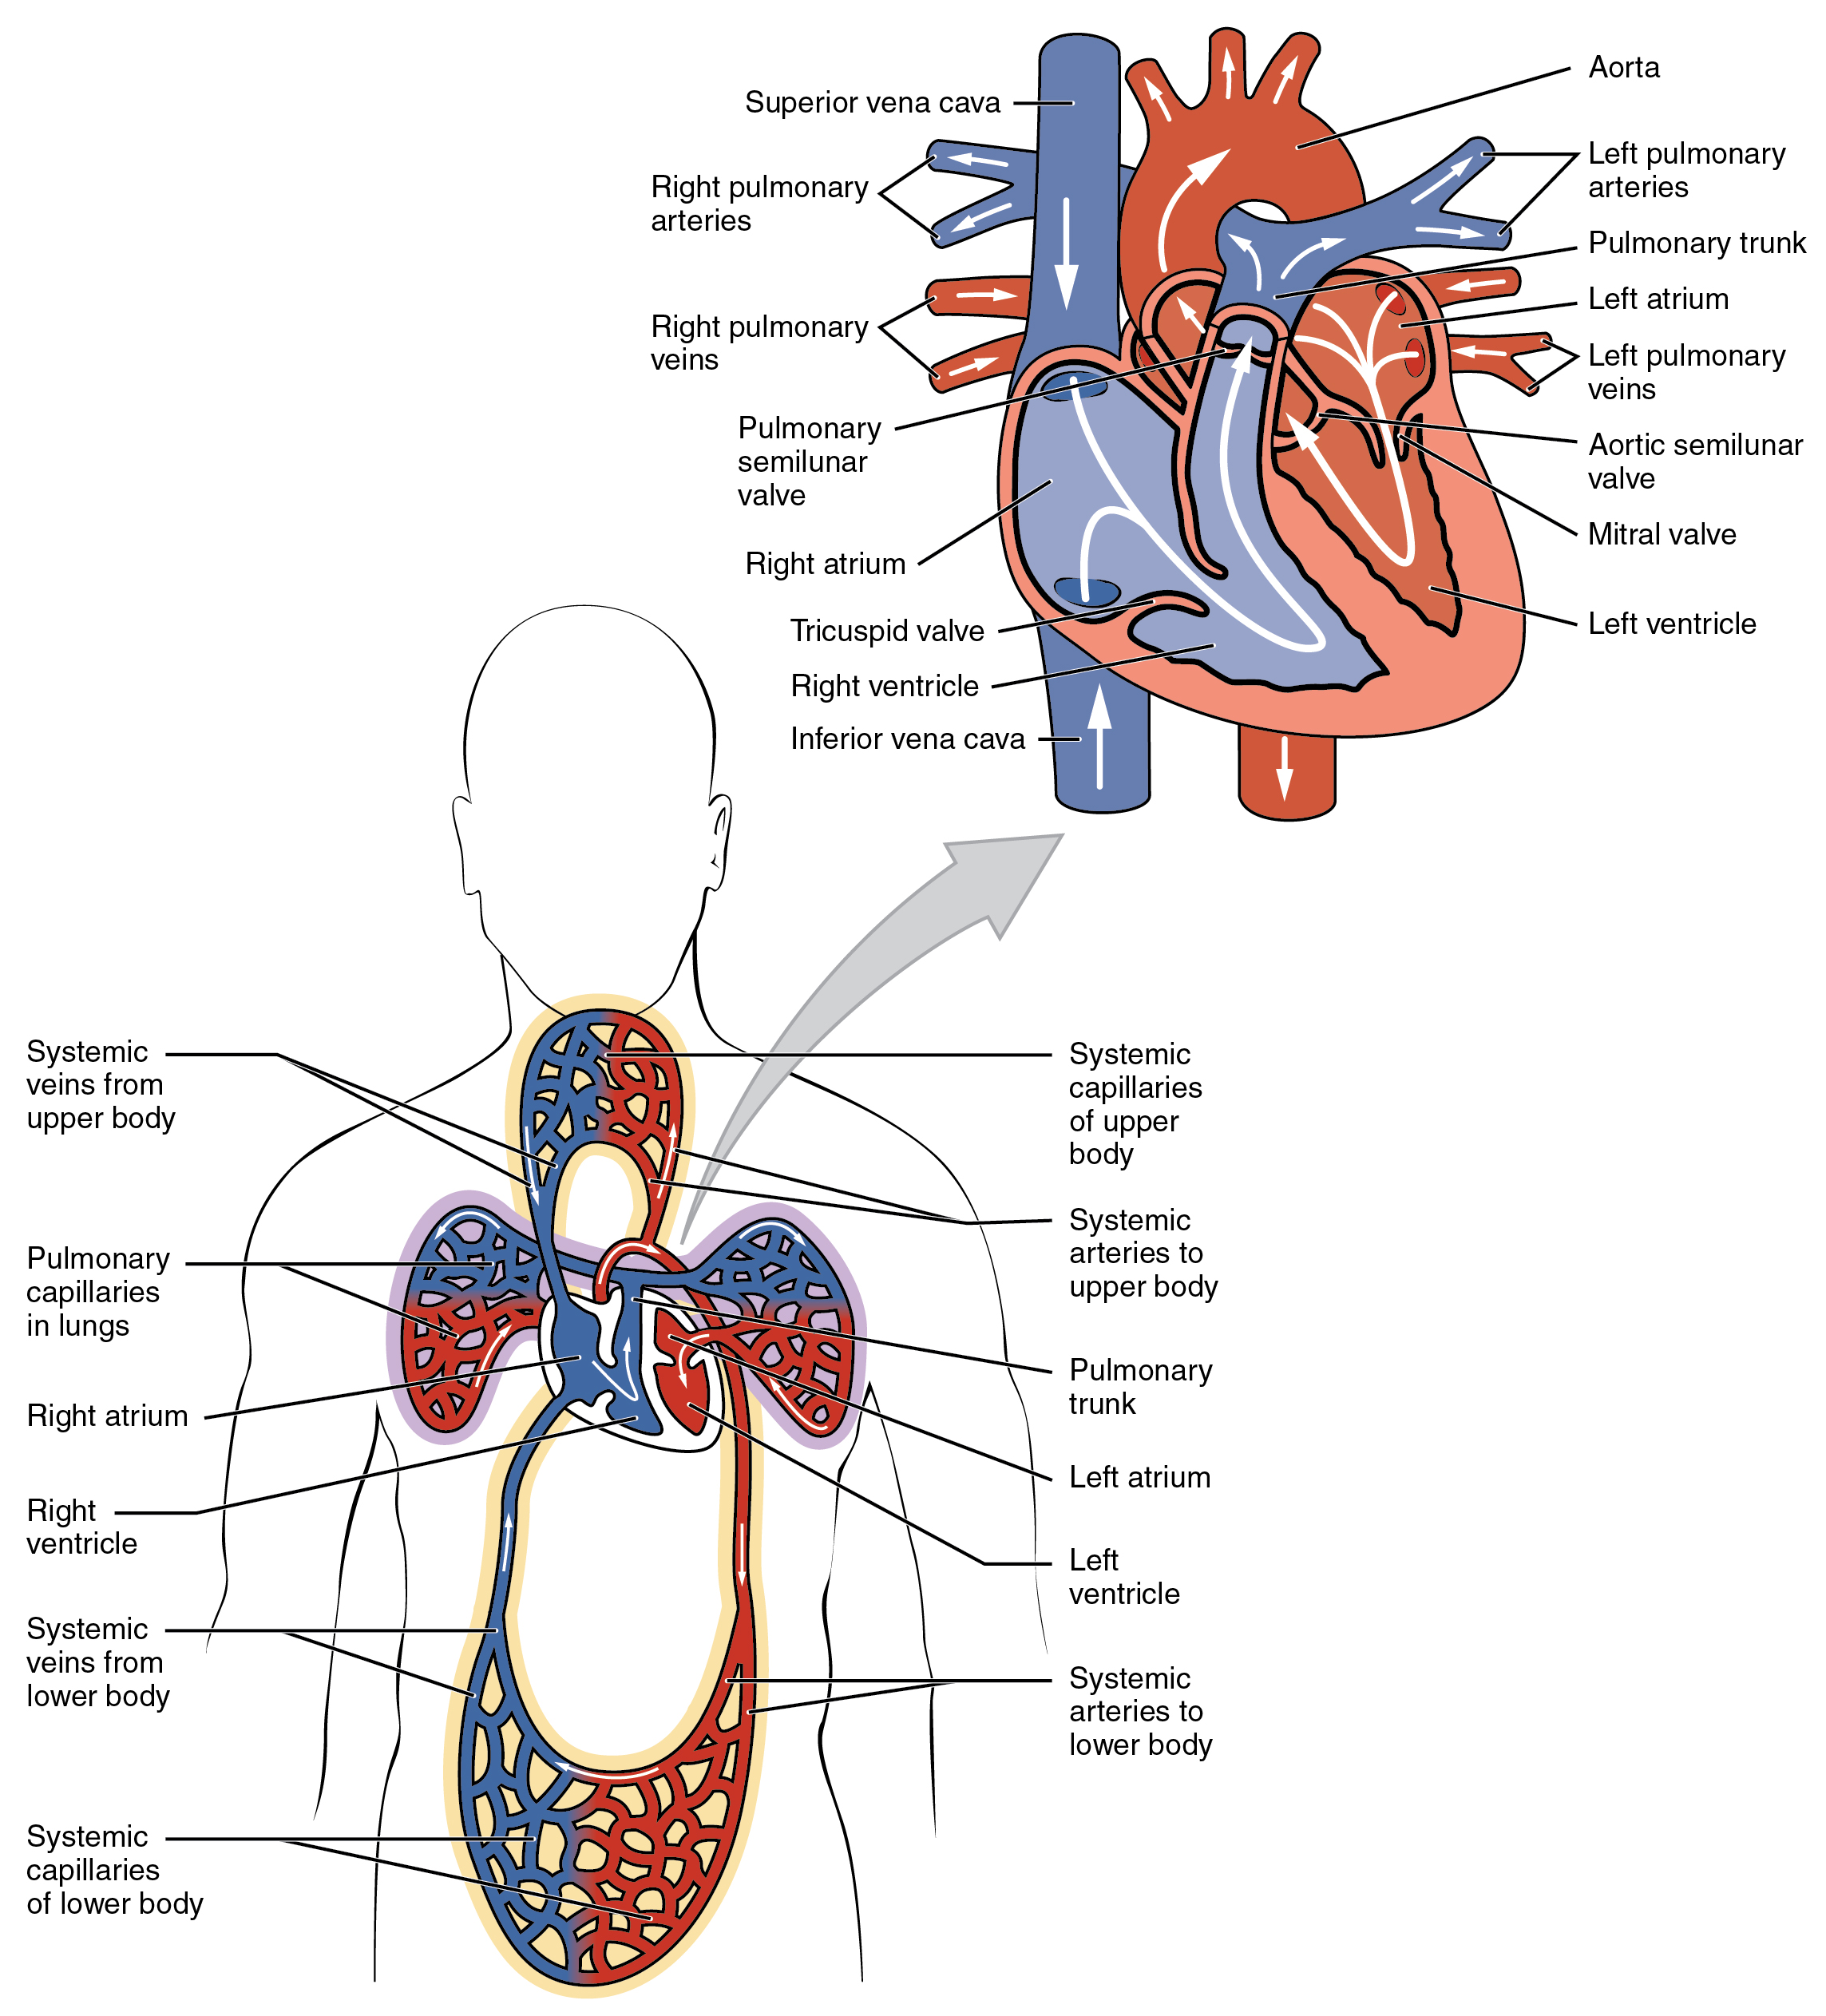 Diagram of heart and circulatory system showing direction of blood flow. Image description available.